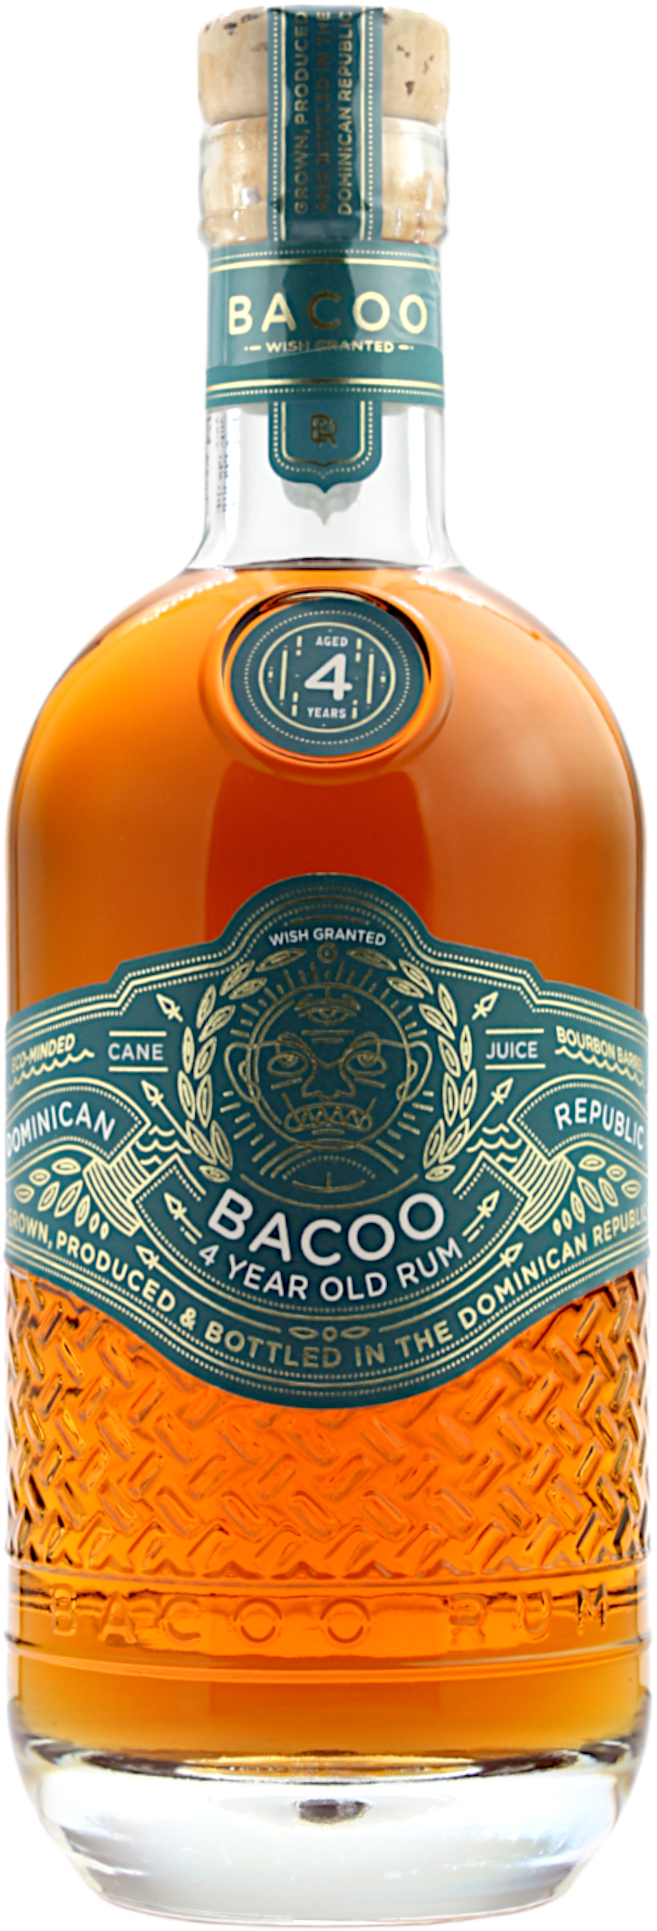 Bacoo Rum 4 Jahre 40.0% 0,7l